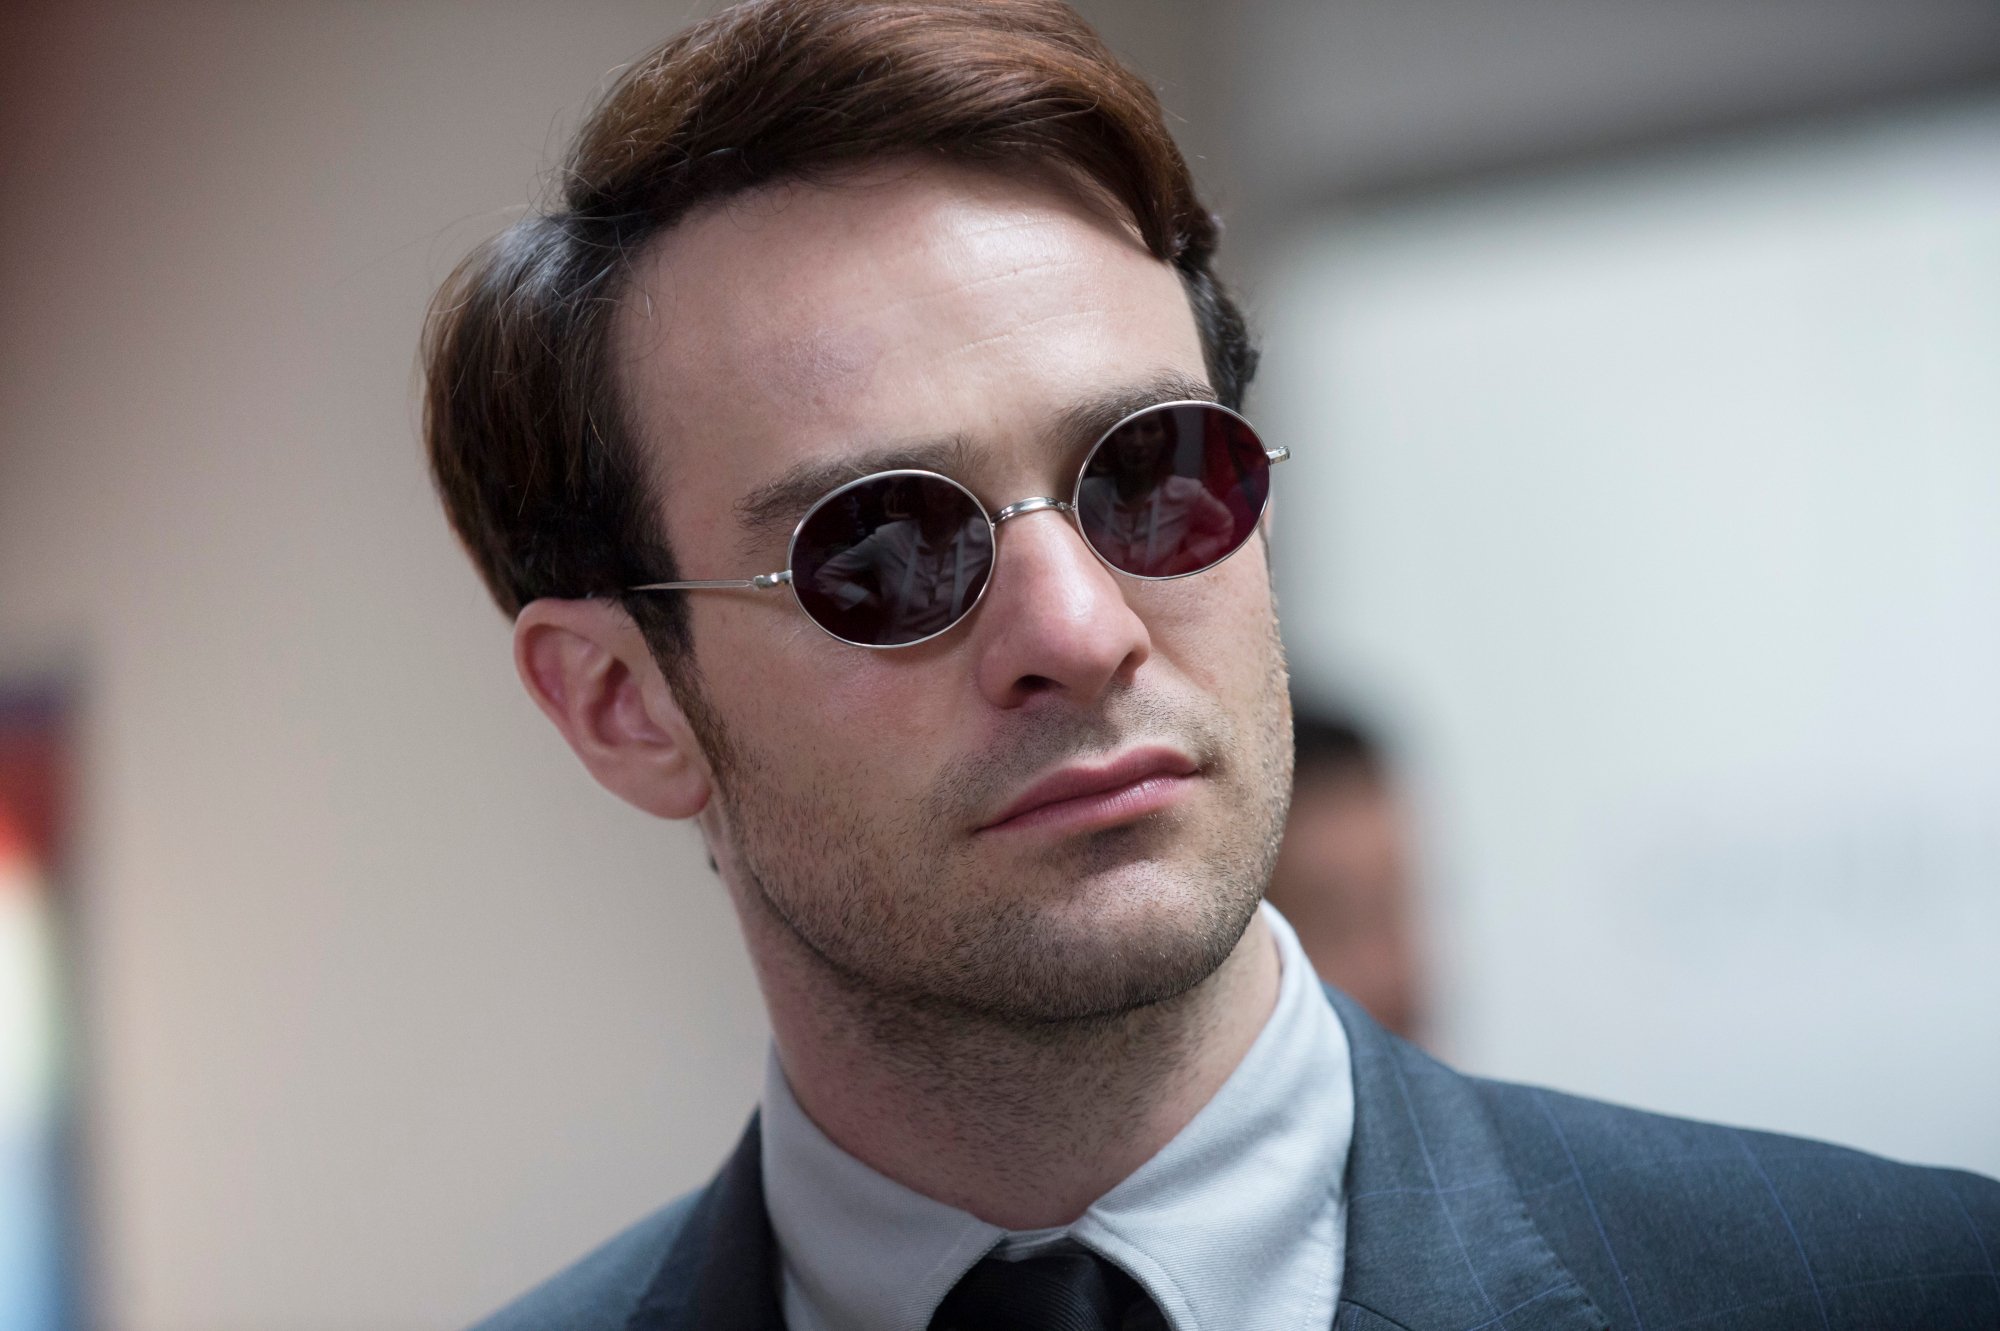 Charlie Cox as Matt Murdock in Netflix's 'Daredevil.' He's wearing dark glasses and a suit. His hair is slicked to the right.